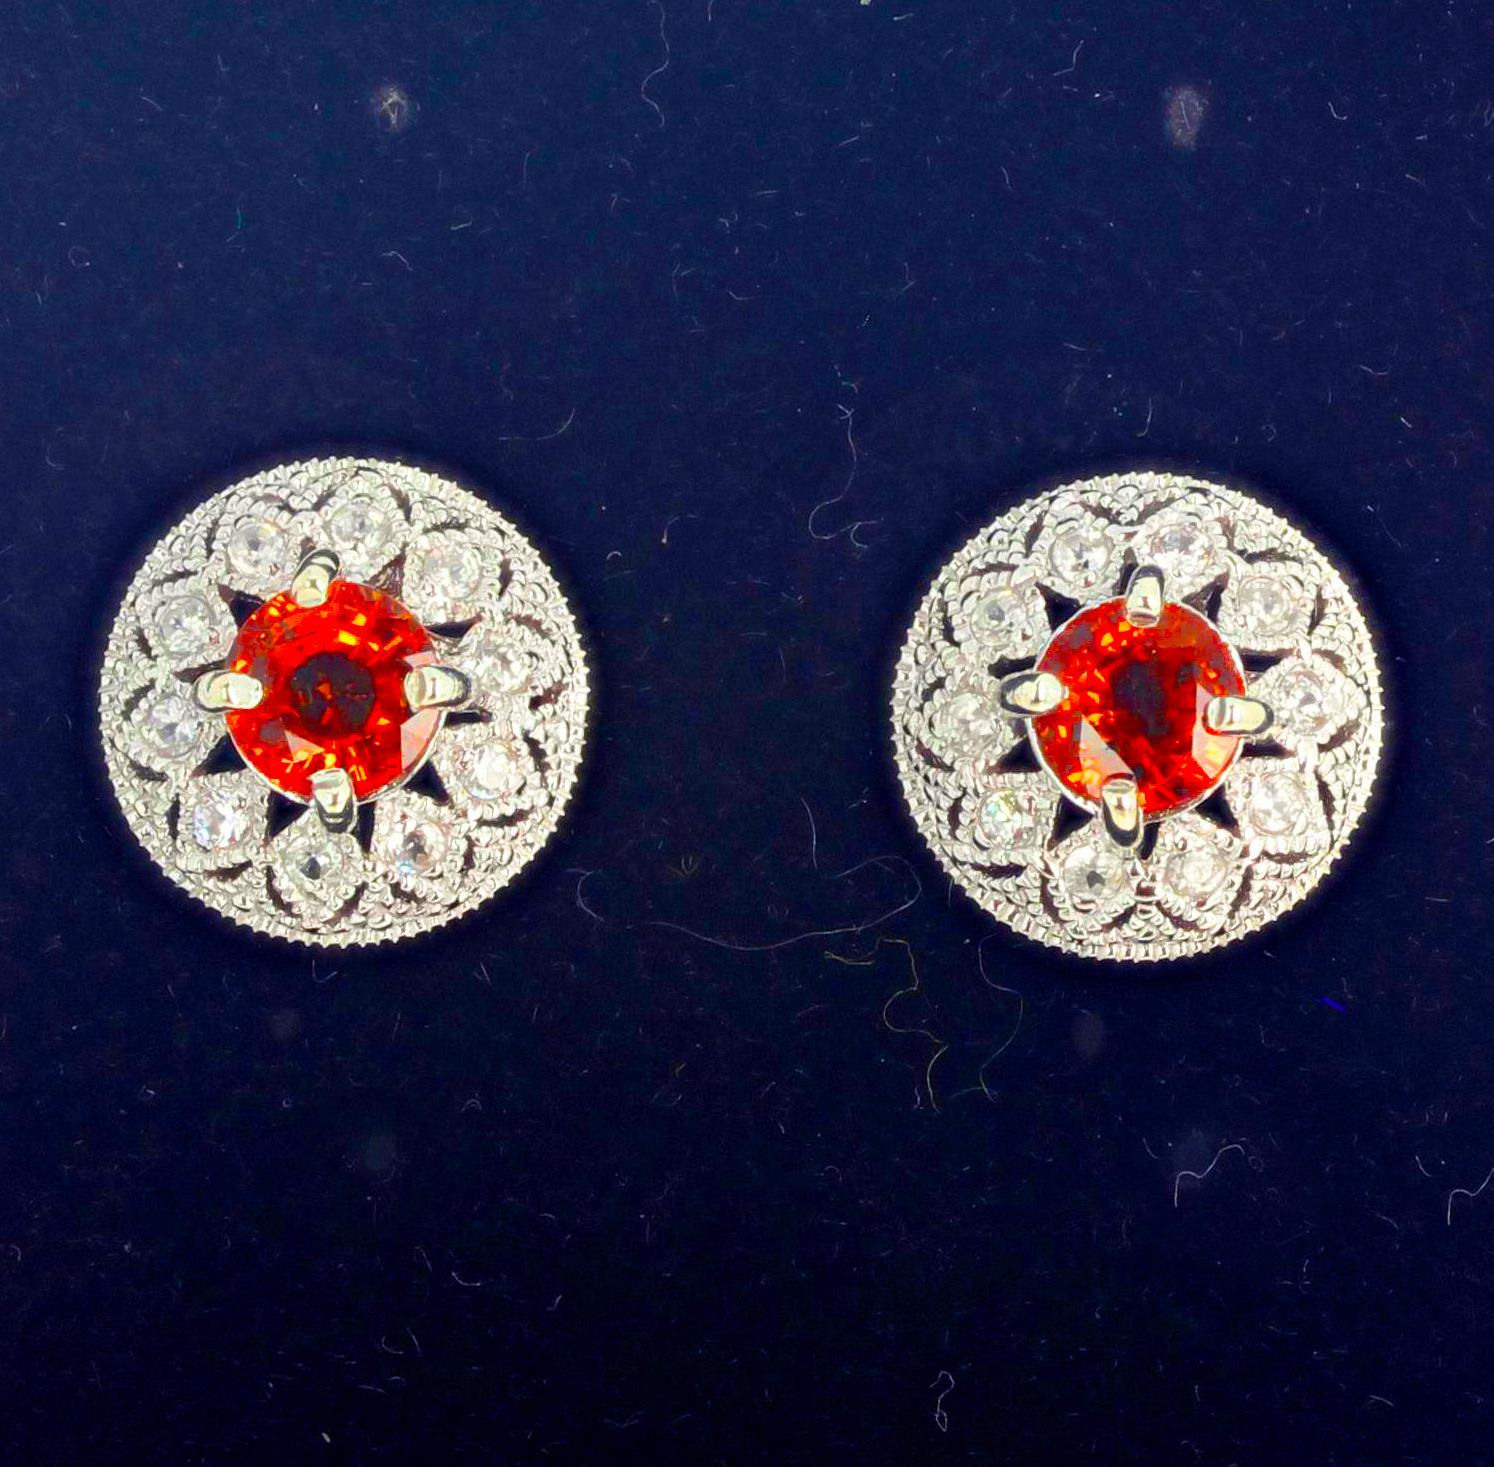 These brilliant orangy red glittering Songea Sapphires ((6mm) are set with accents of brilliant teeny tiny Diamonds in platinum plated sterling silver stud earrings.  The earrings are approximately 13 mm in diameter.  